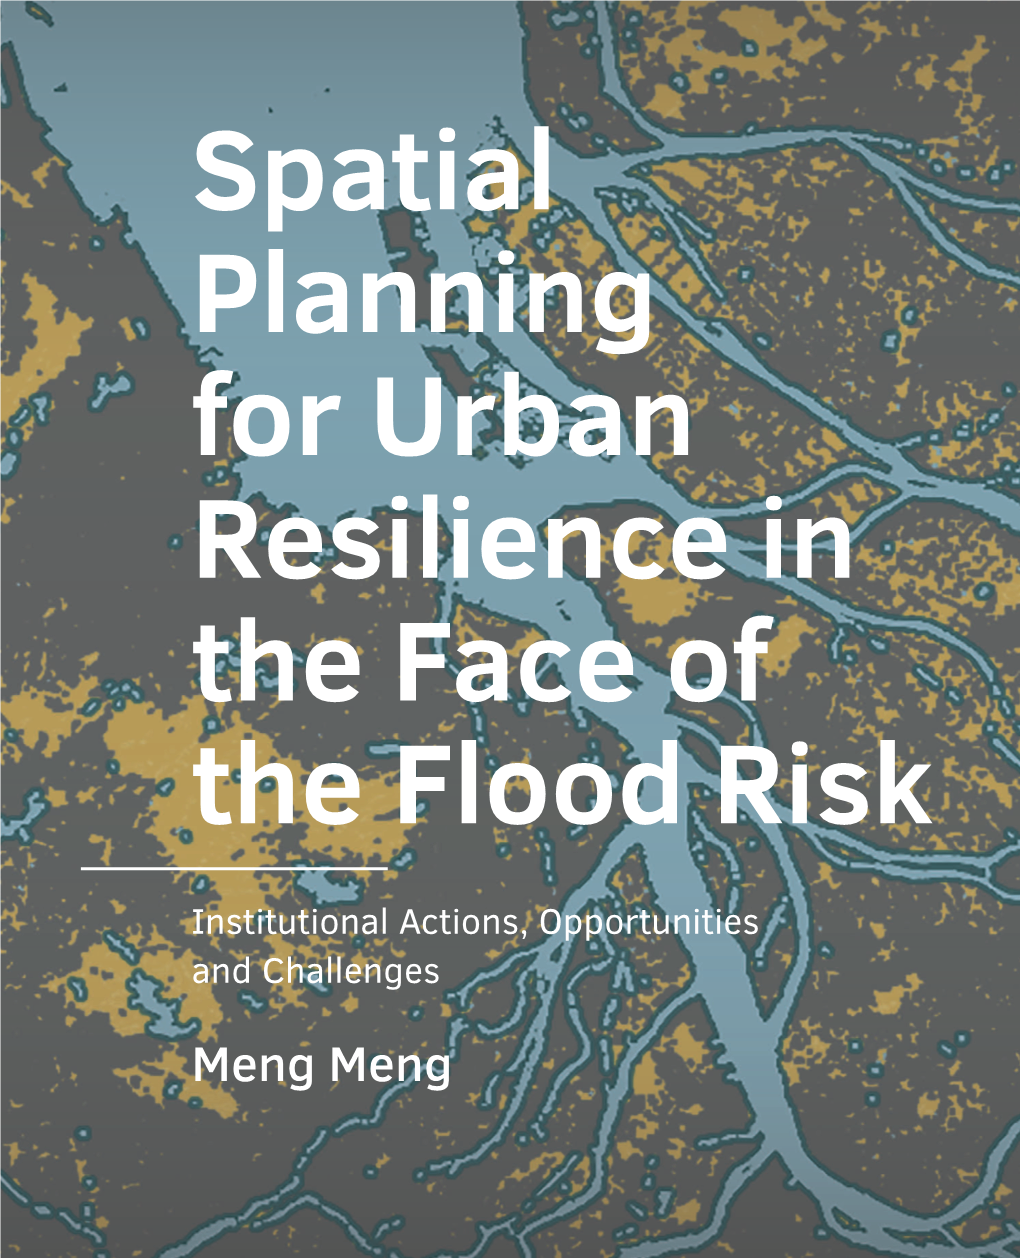 Spatial Planning for Urban Resilience in the Face of the Flood Risk: Institutional Actions, Opportunities and Challenges